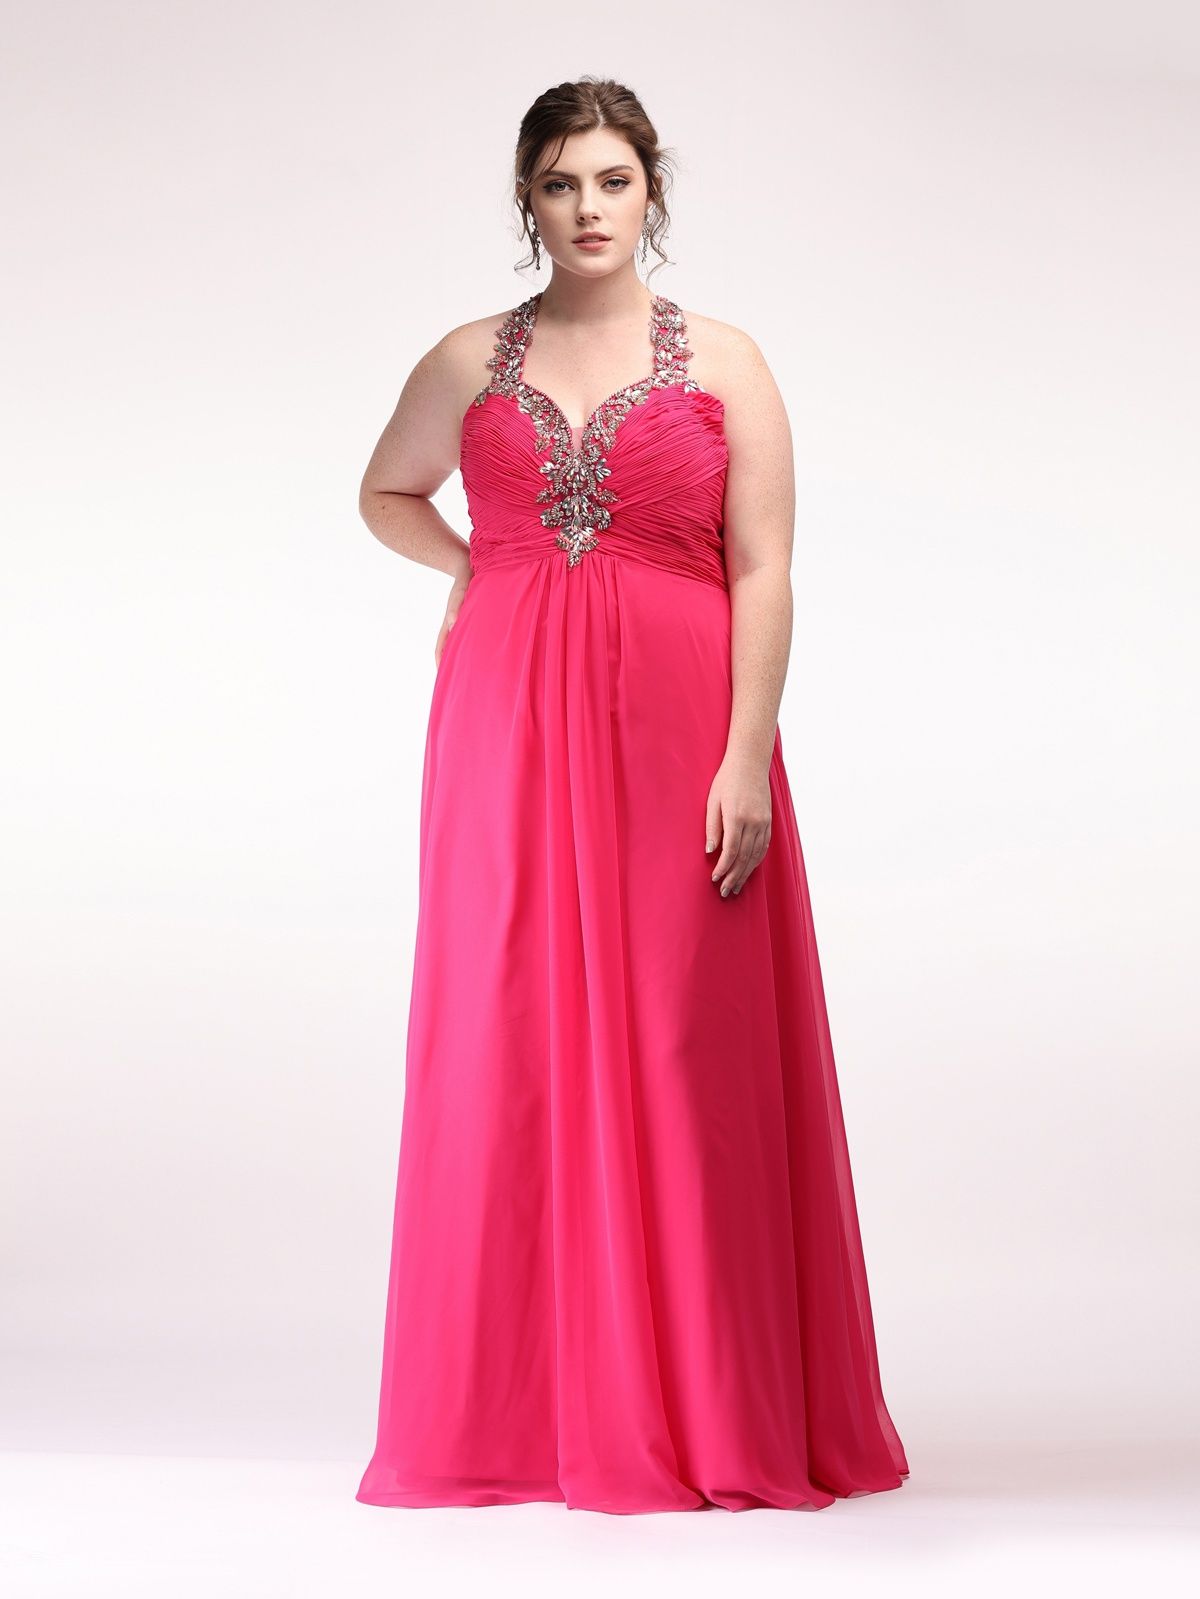 Style Makayla Socialite Fashions Plus Size 18 Prom Halter Sequined Hot Pink Floor Length Maxi on Queenly